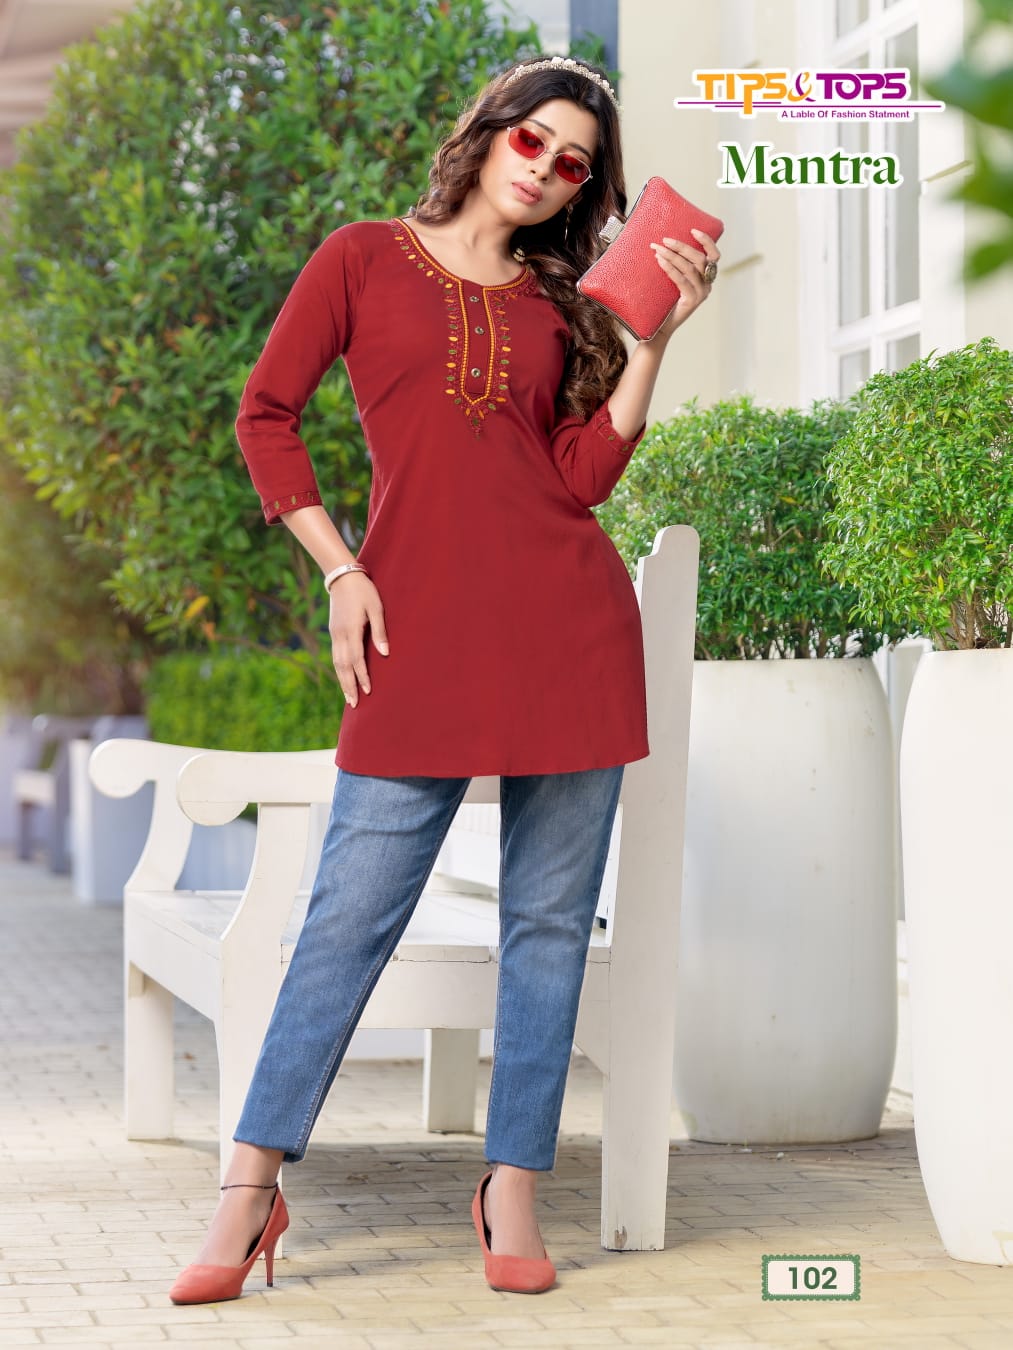 Tips And Tops Mantra collection 2